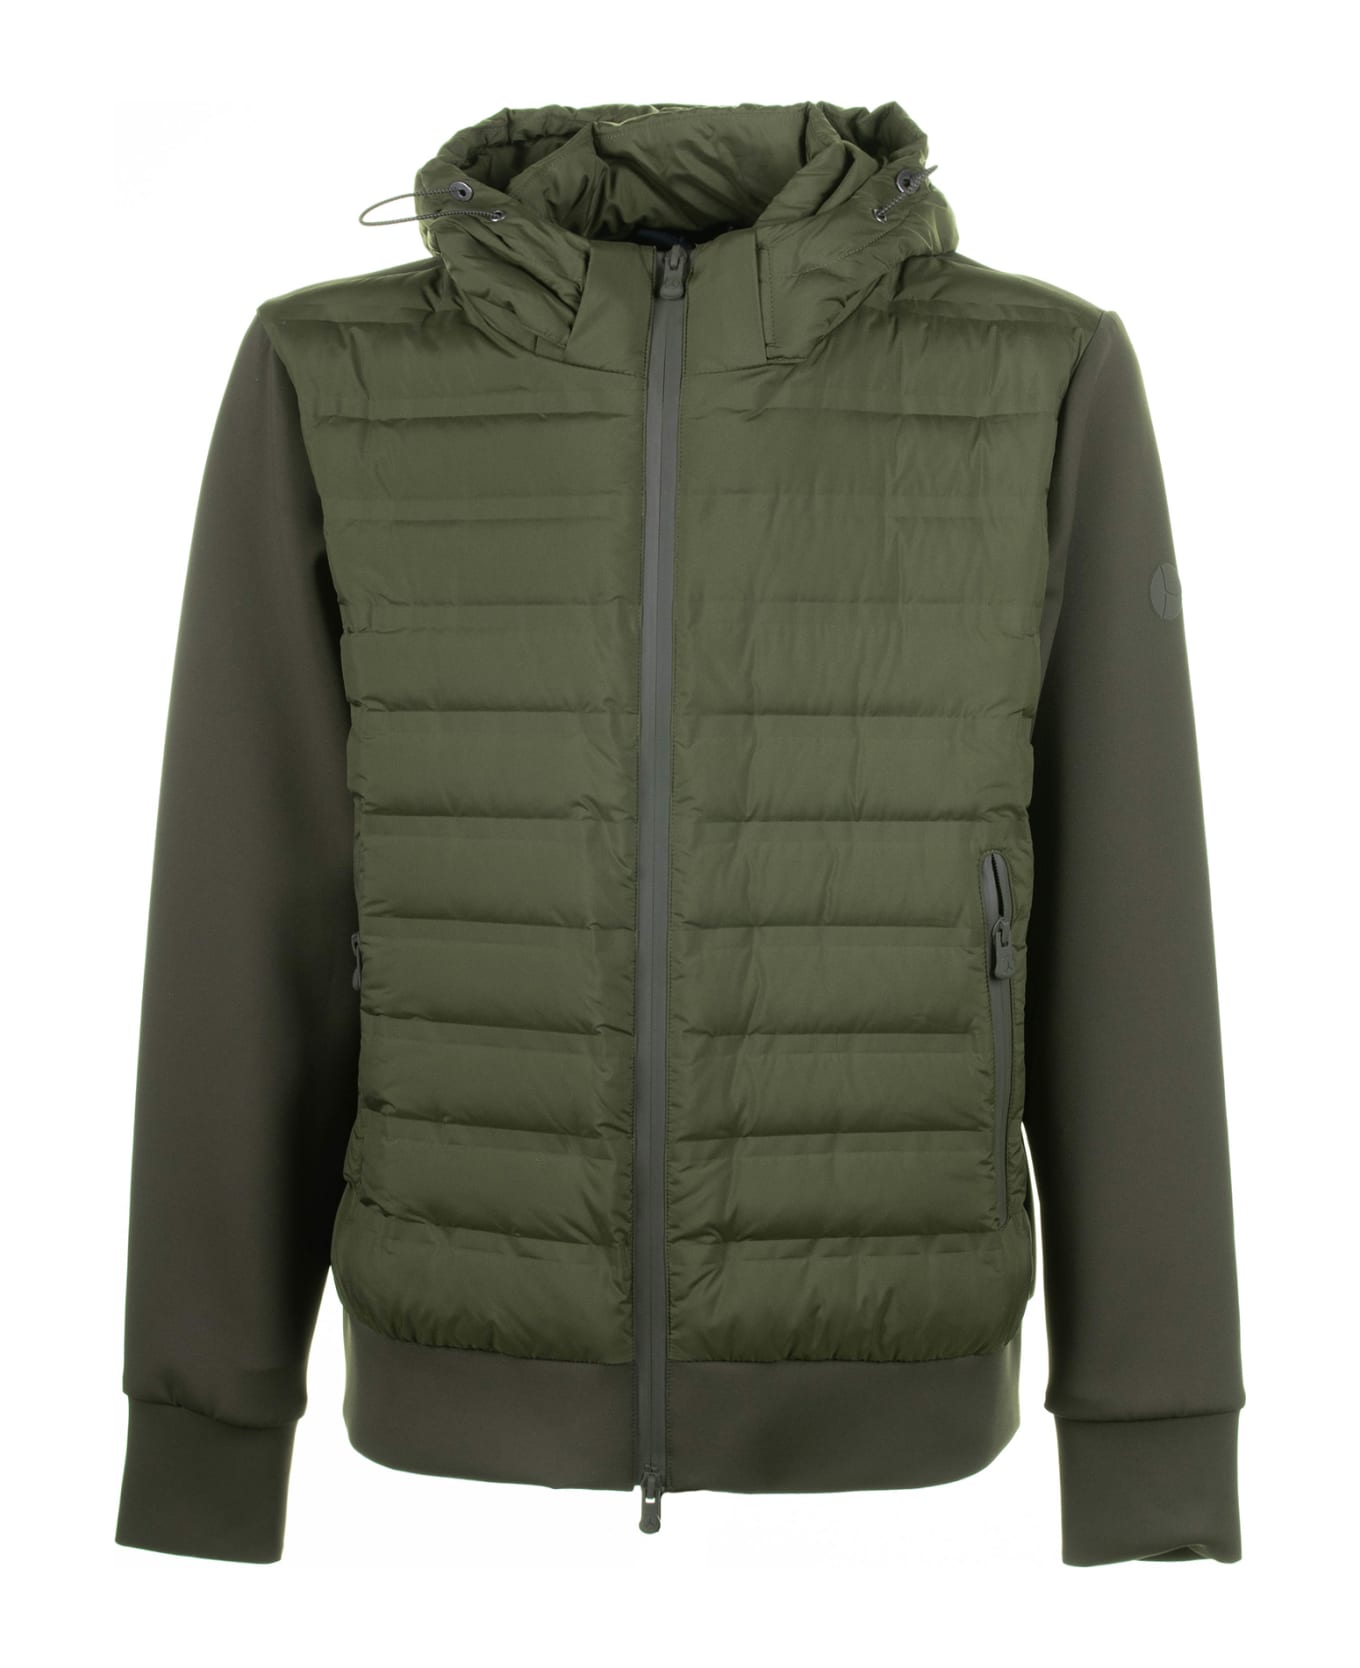 People Of Shibuya Green Quilted Jacket With Hood - VERDE